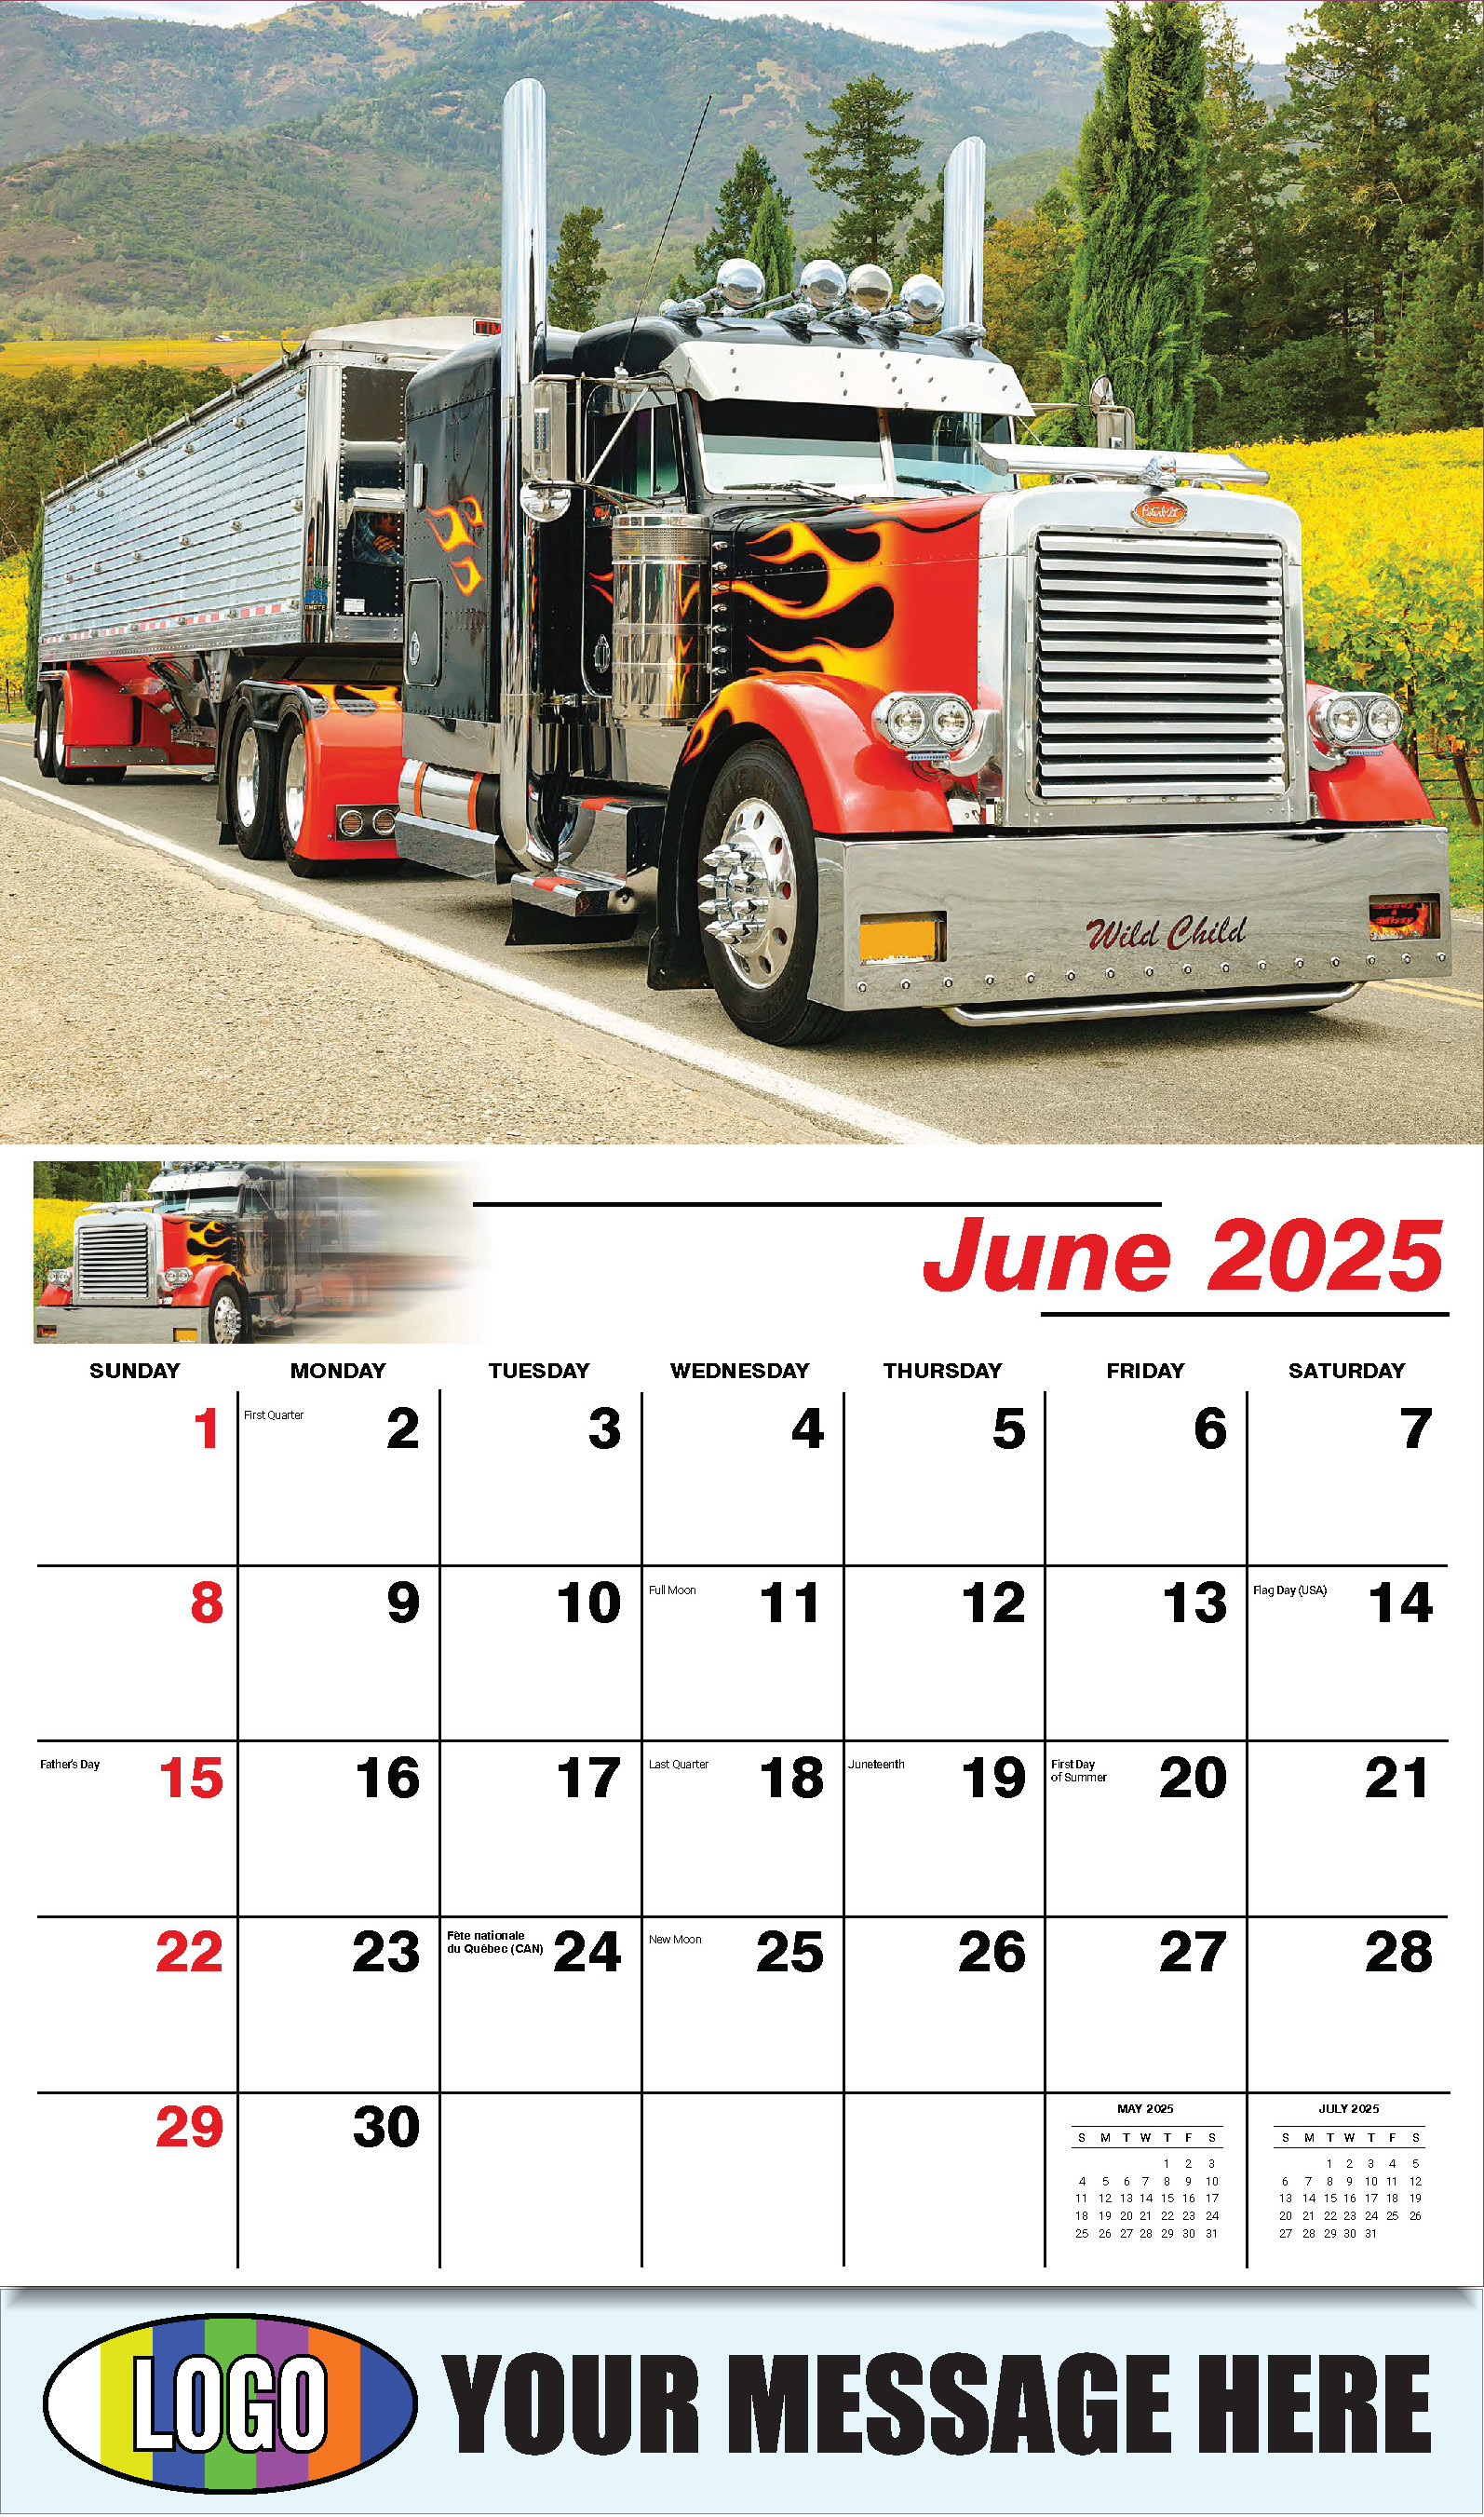 Kings of the Road 2025 Automotive Business Promotional Calendar - June